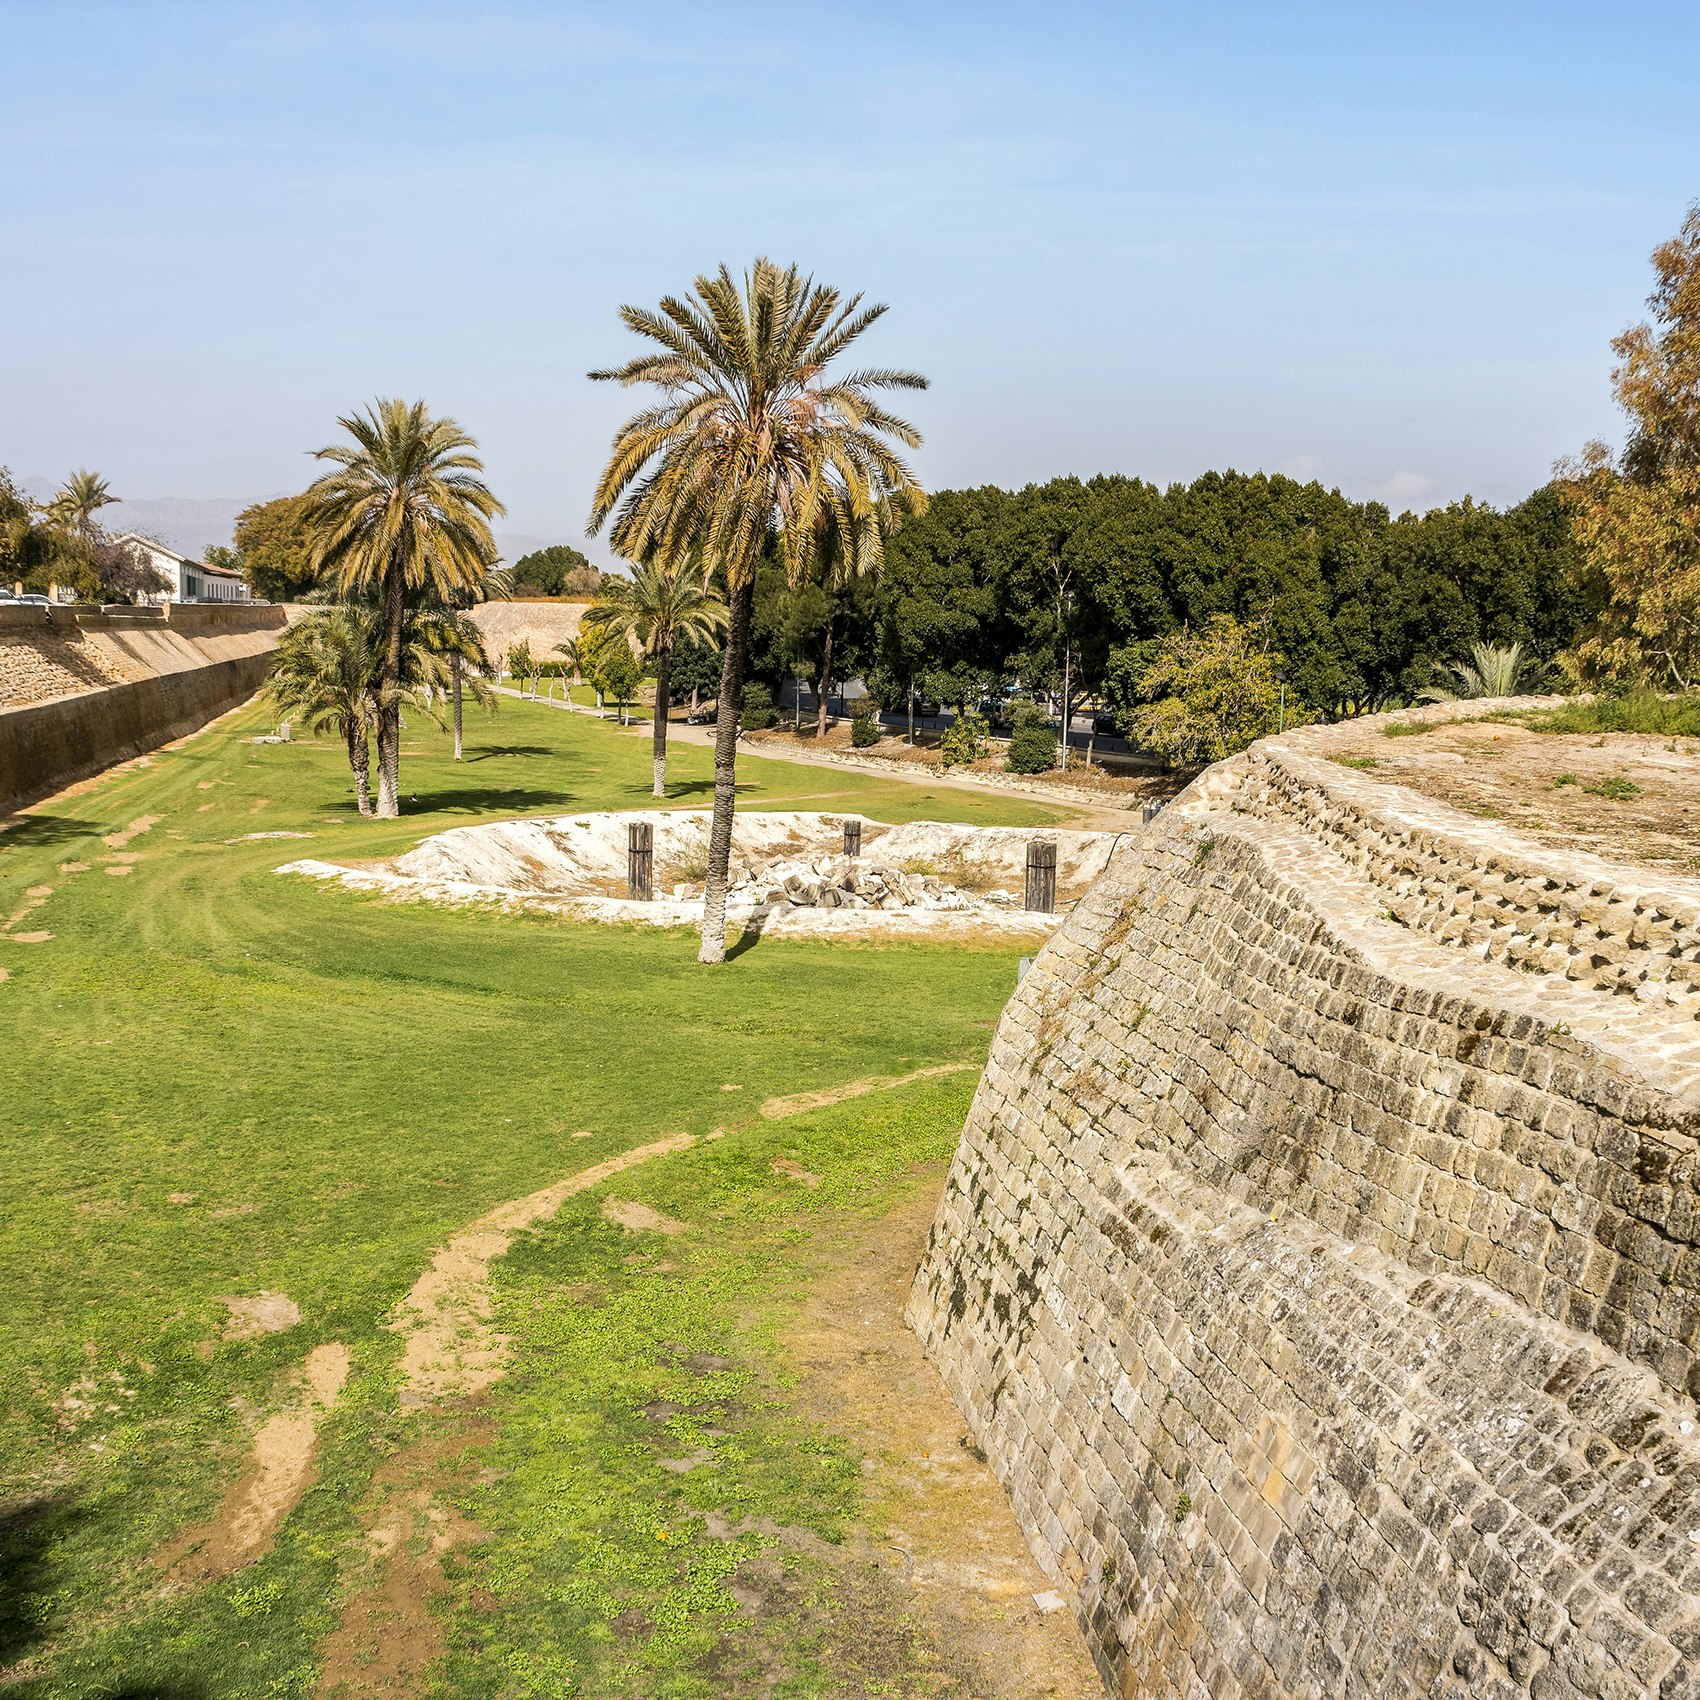 16th century Venetian walls of Nicosia, Cyprus; Shutterstock ID 132634124; Your name (First / Last): Brana V; GL account no.: 65050; Netsuite department name: Online Editorial; Full Product or Project name including edition: Nicosia destination page